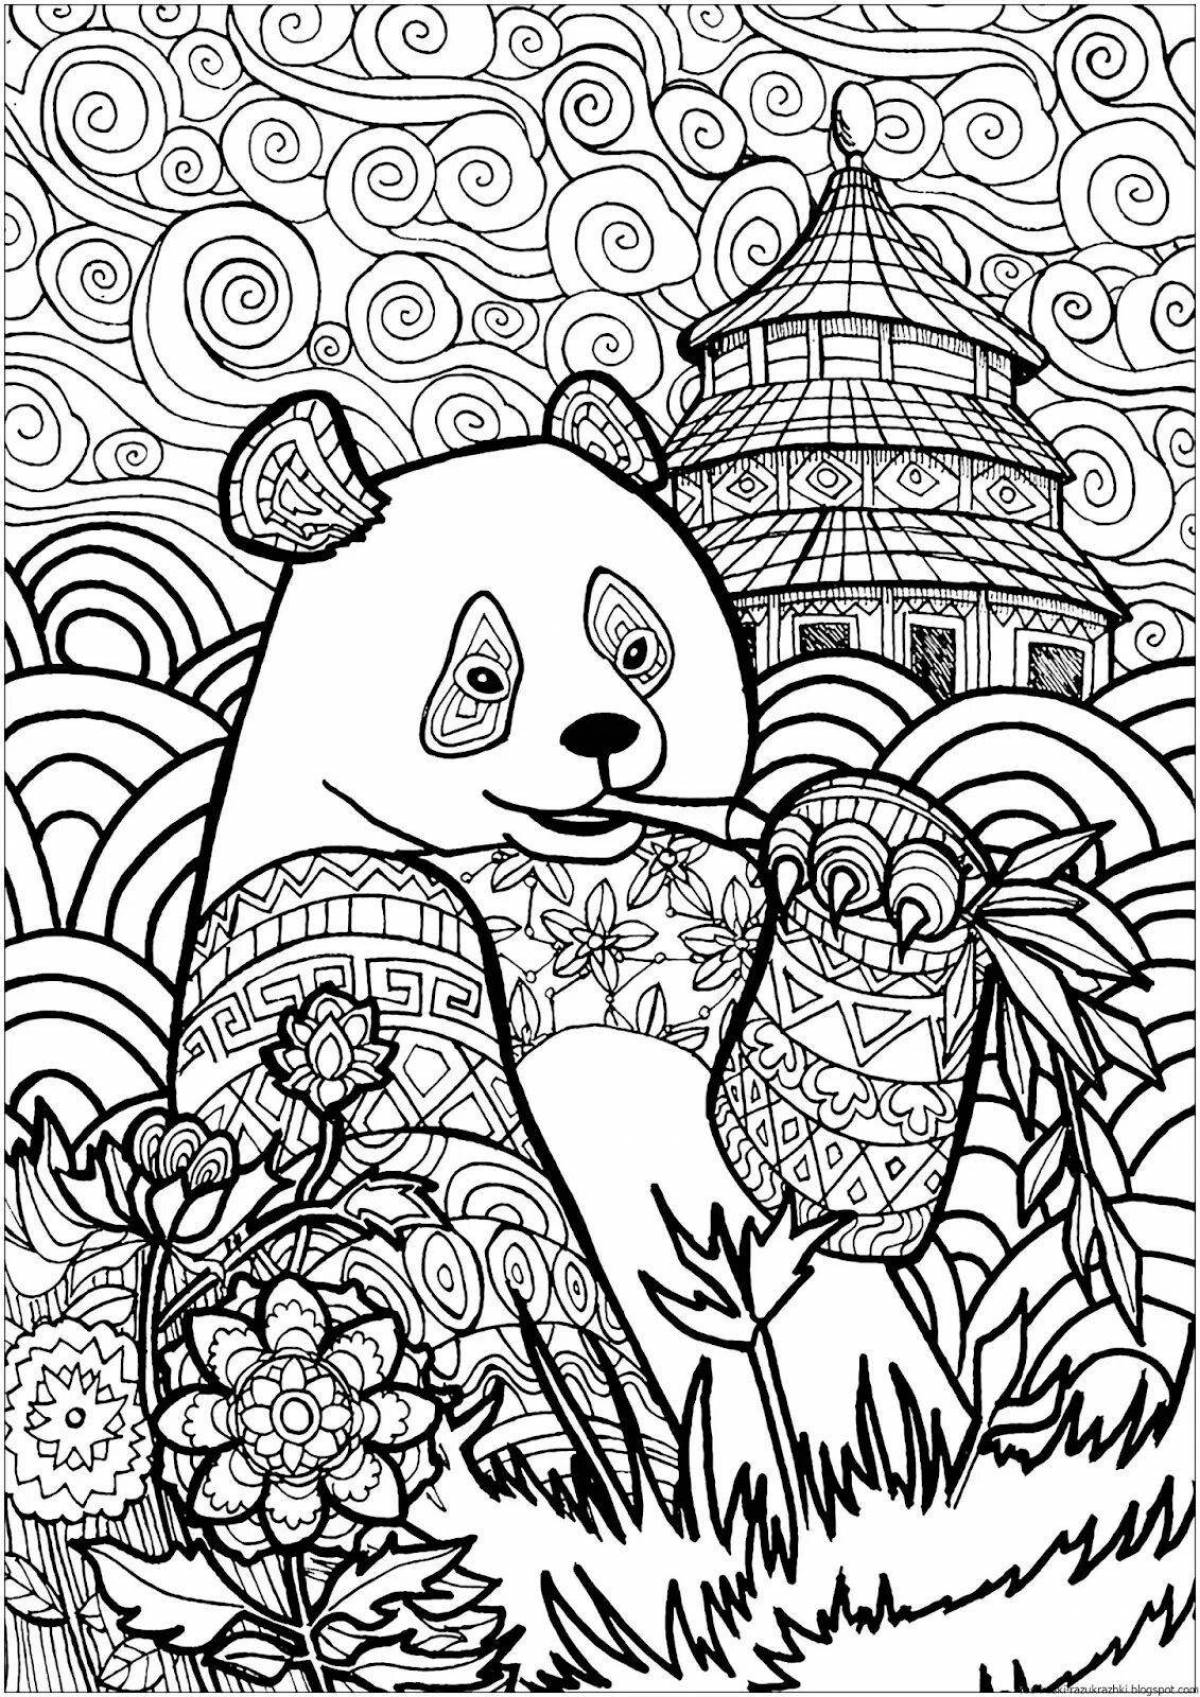 Inspirational art therapy coloring book for kids